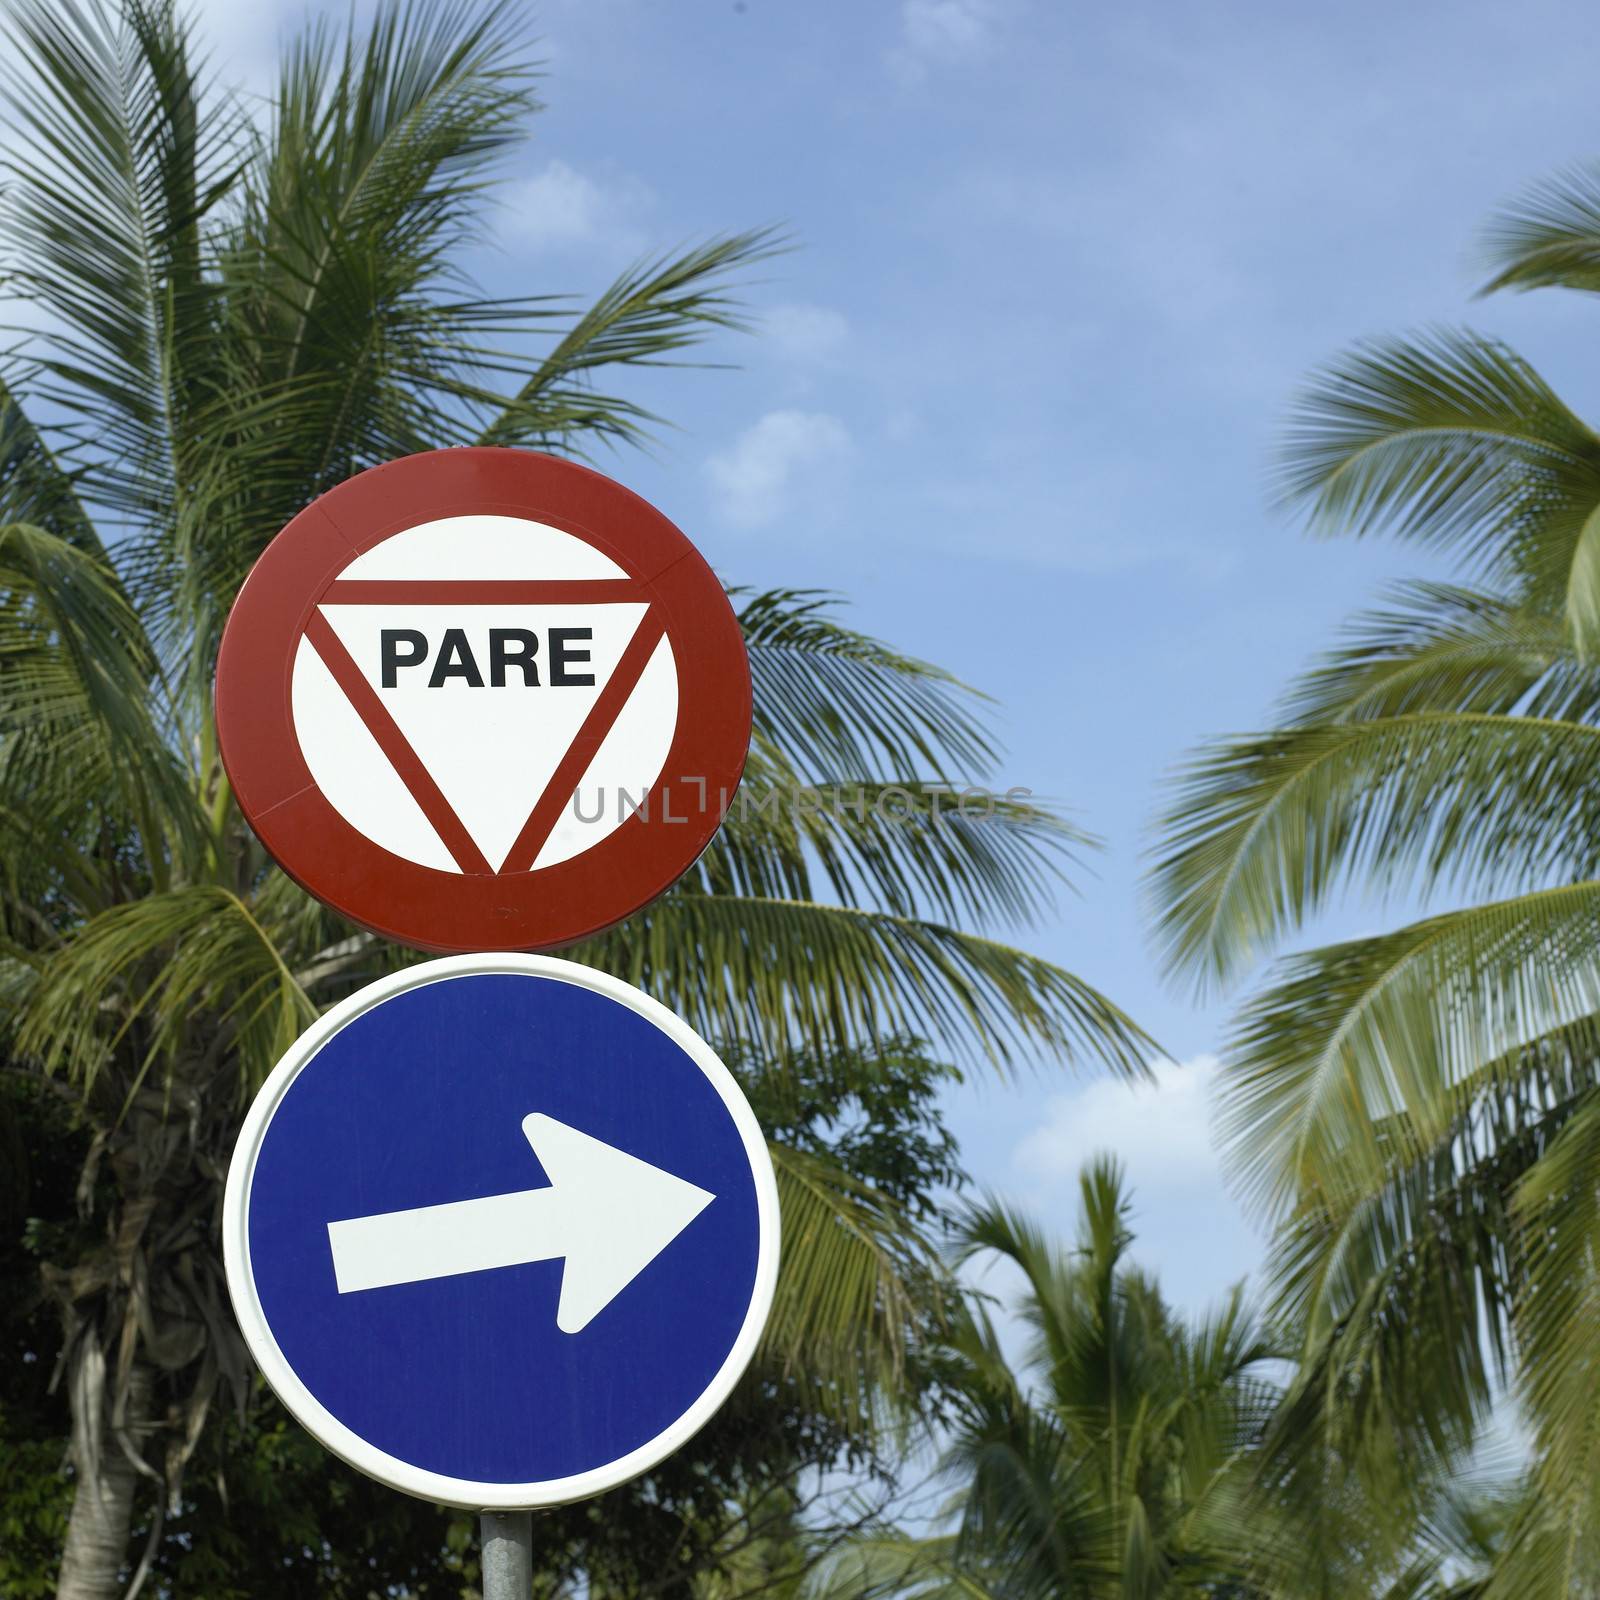 Pare sign and arrow with palm tree background